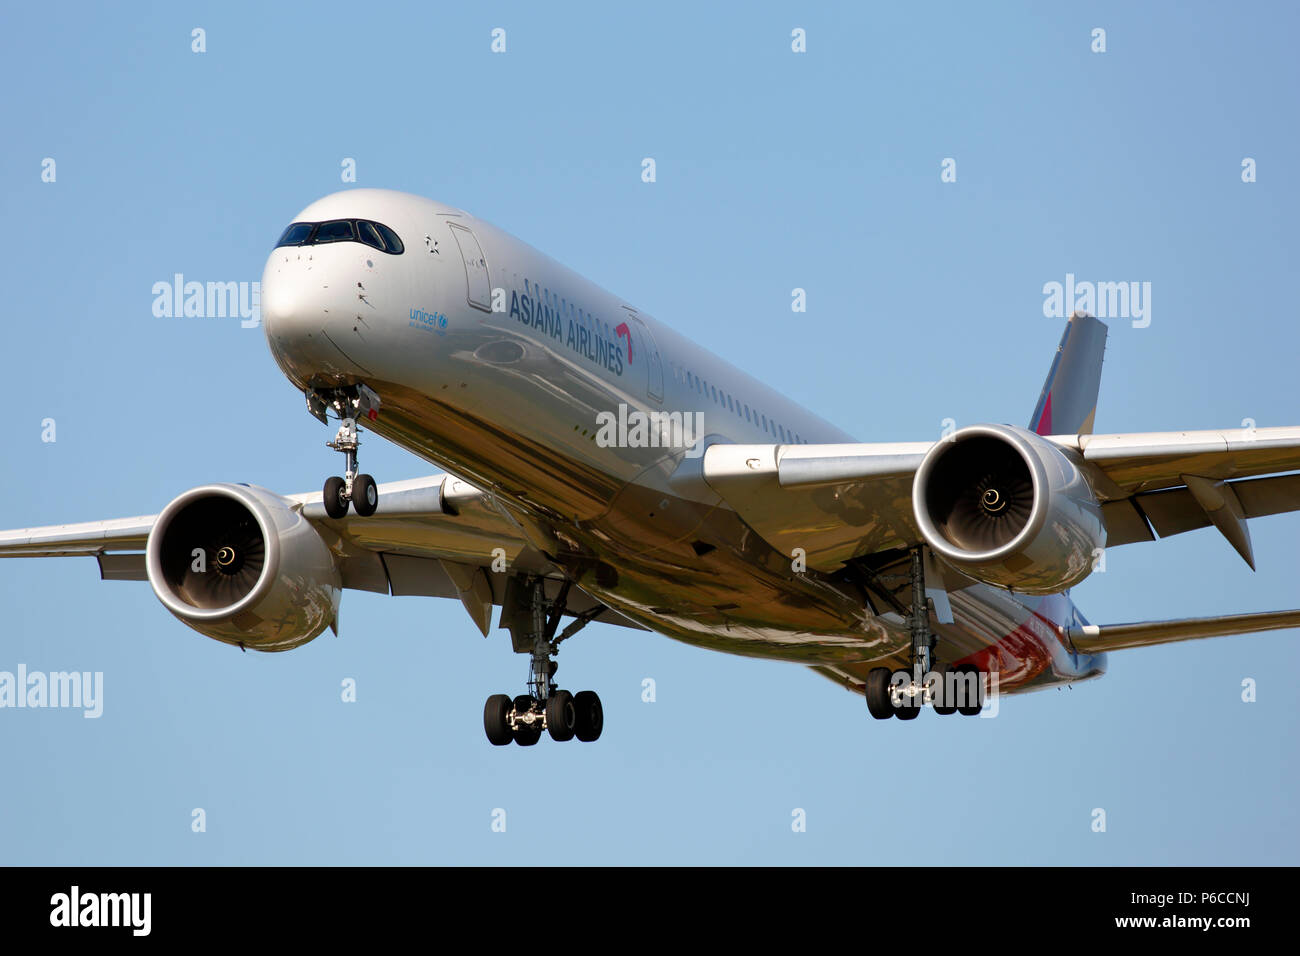 HL7578 Asiana Airlines Airbus A350-900 Foto Stock